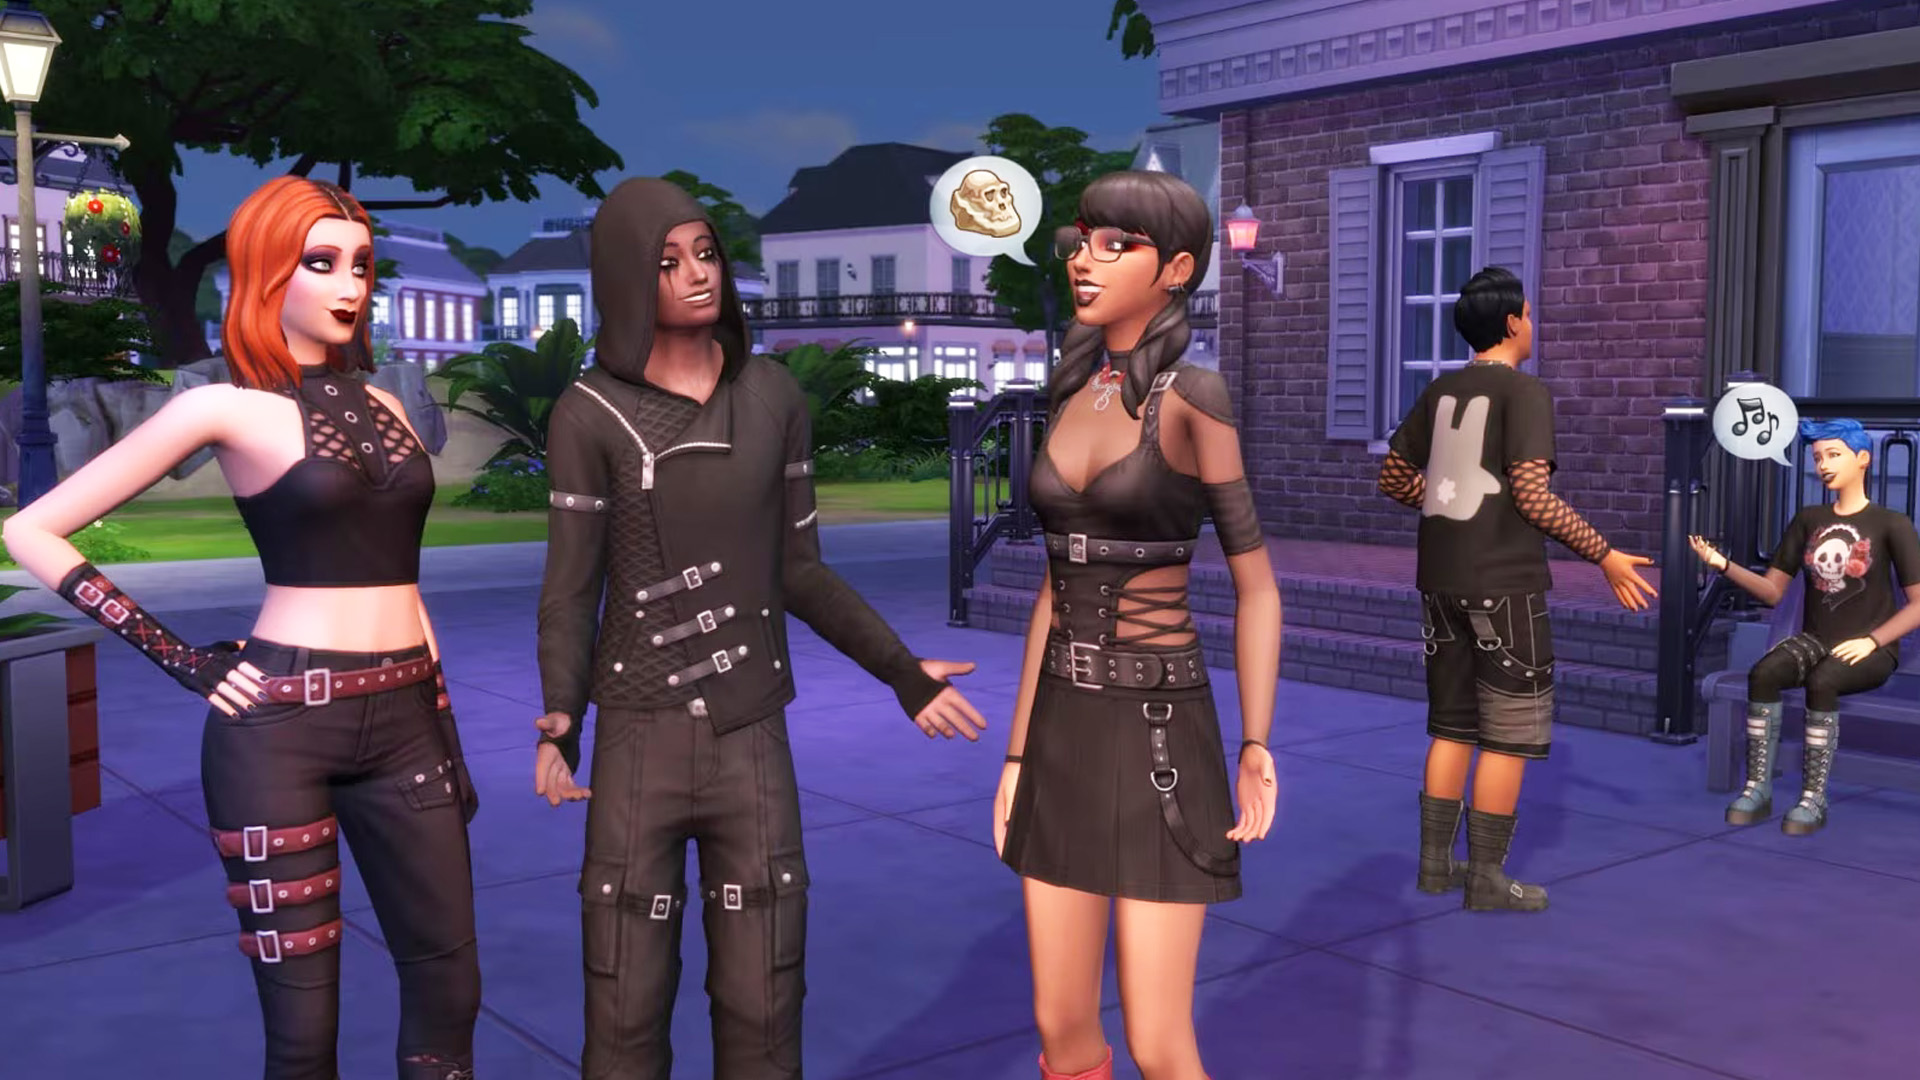 The Sims 4's latest expansion kit is giving people googly eyes